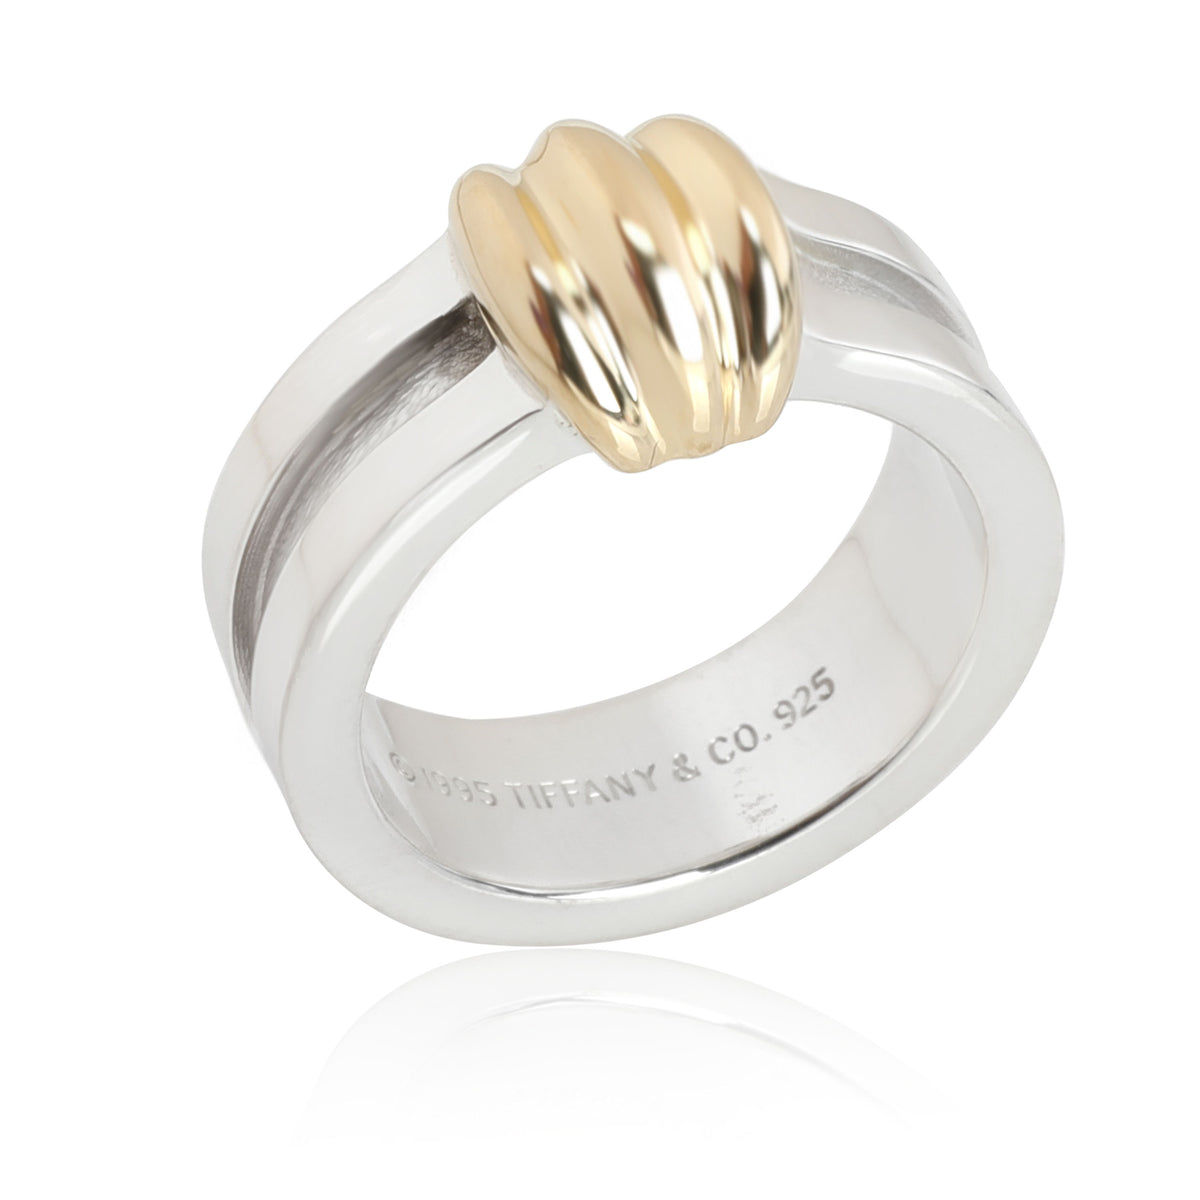 Tiffany & Co. Band in 18K Yellow Gold/Sterling Silver